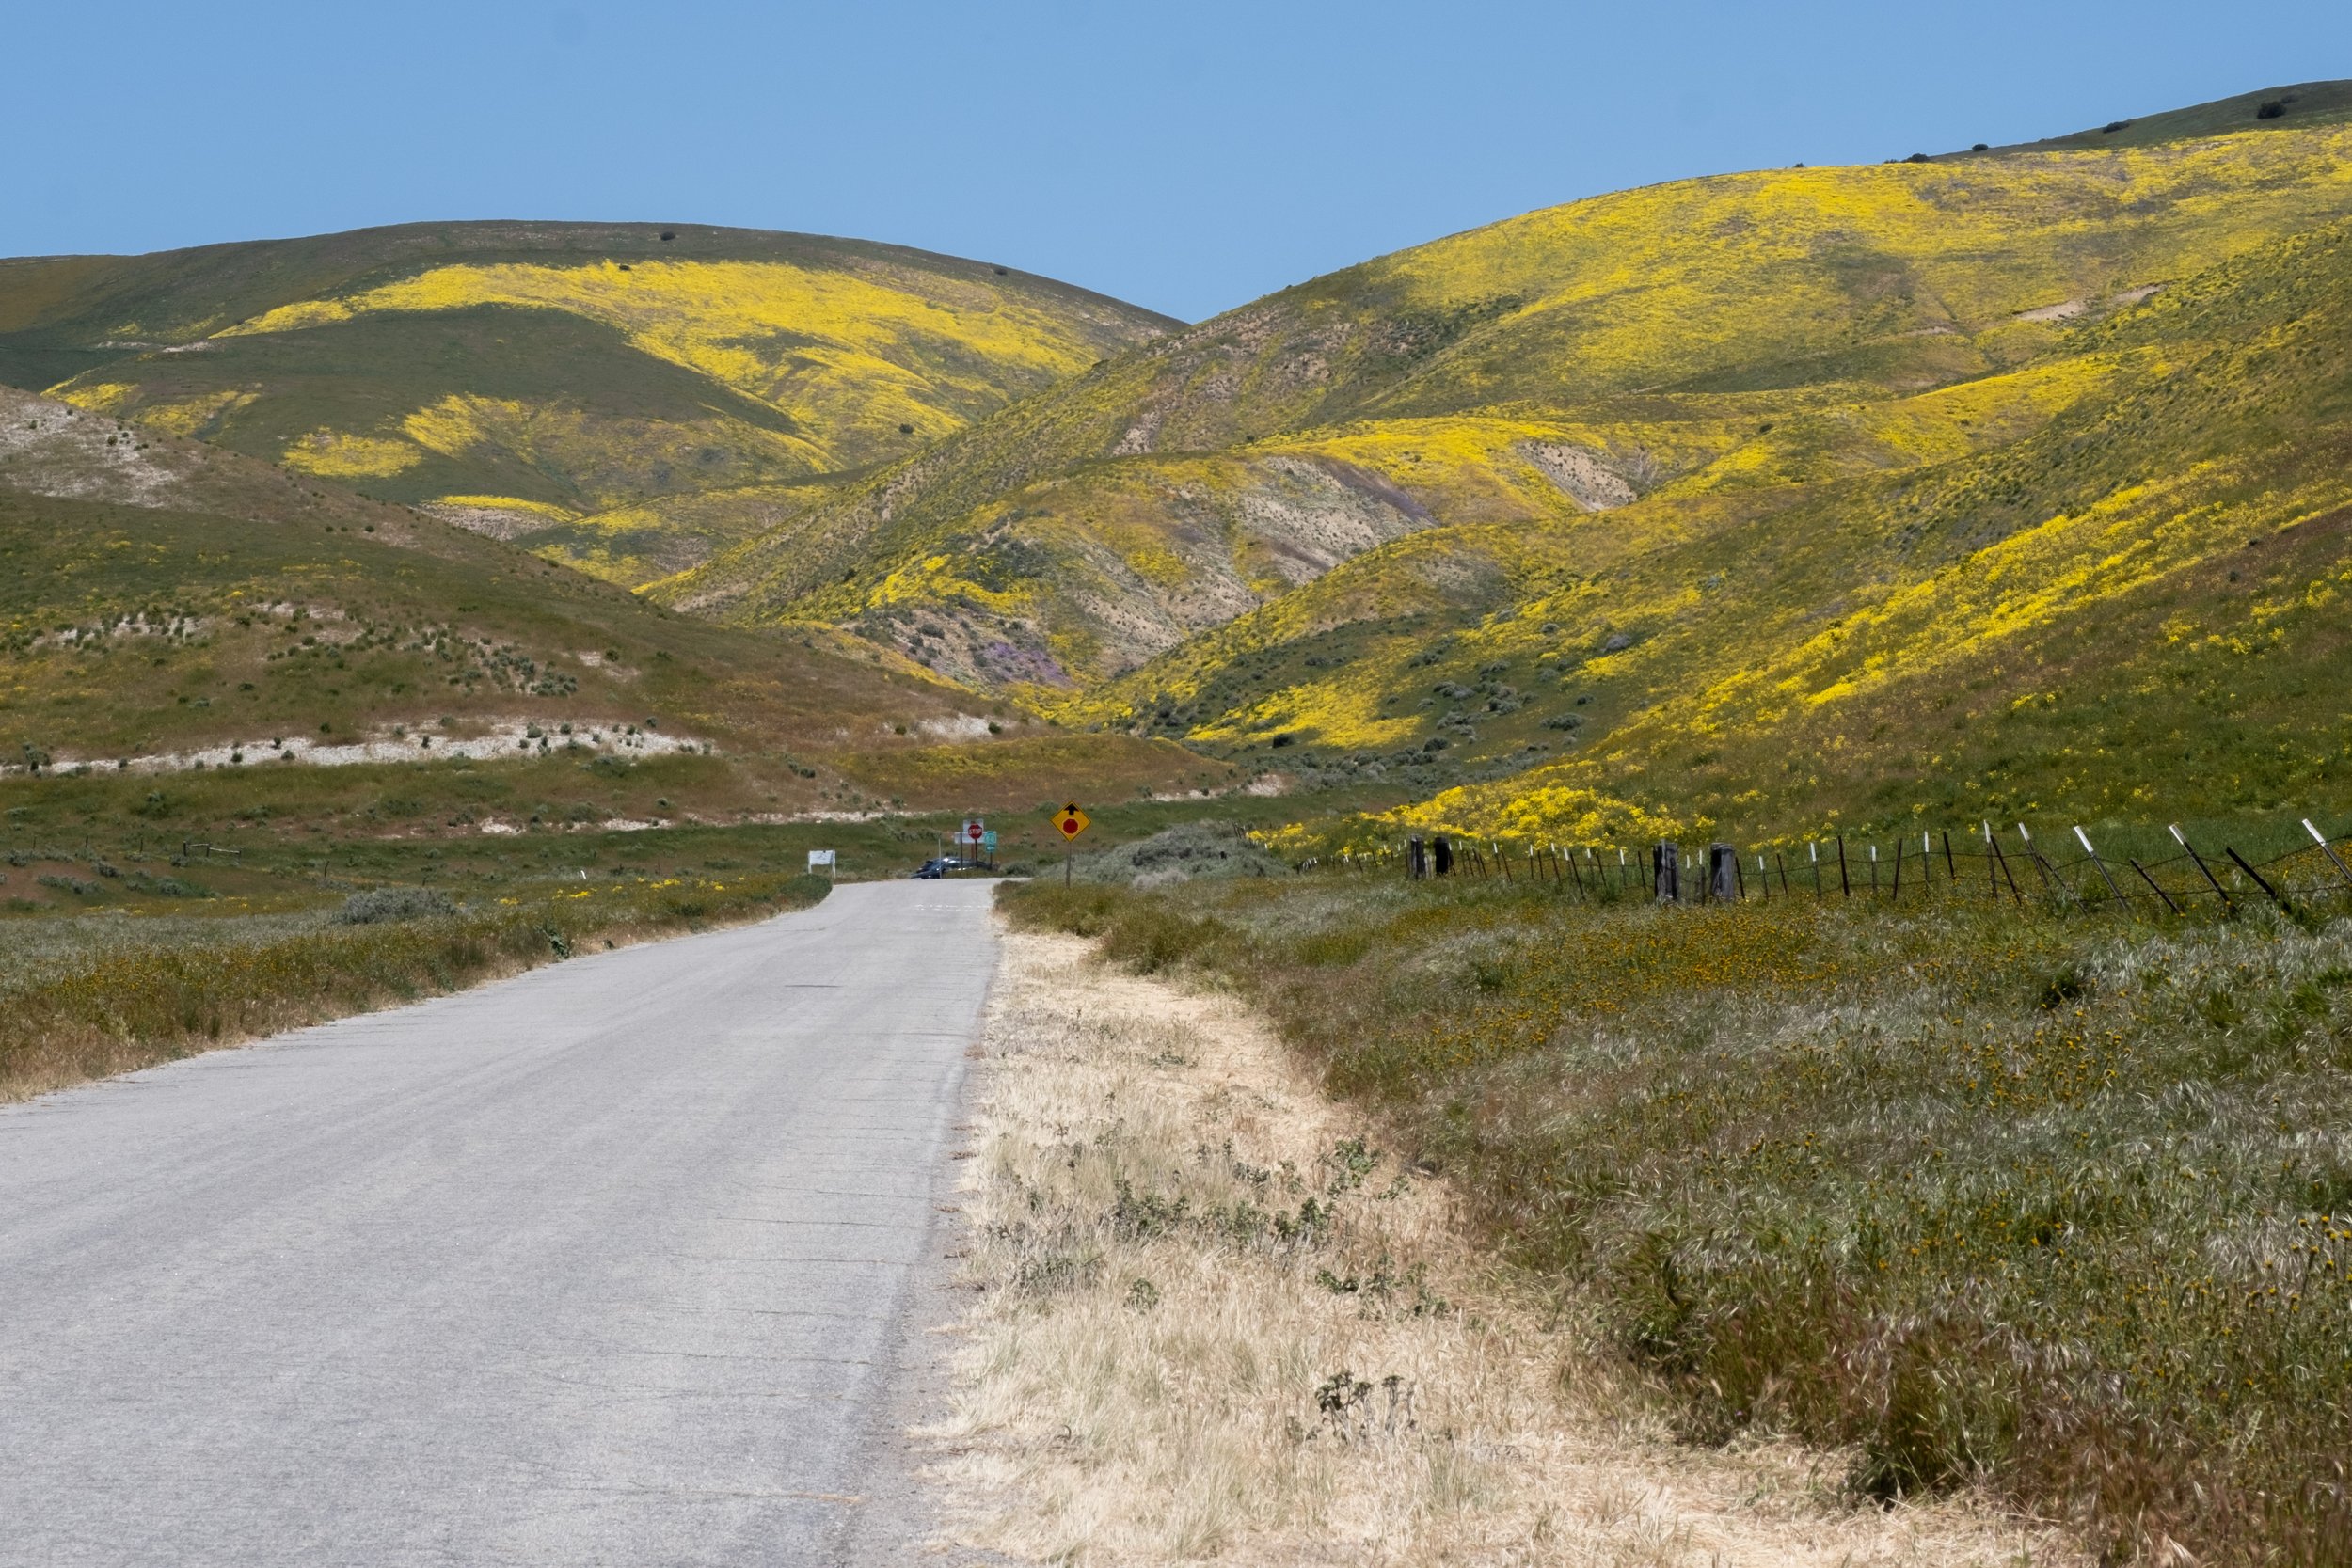  The wildflowers are blooming profusely in Carrizo Plain National Monument in Santa Margarita, Calif. on Monday, April 24th, 2023. The hills lining Elkhorn Road on the north side of theh park are especially bright. (Akemi Rico | The Corsair)d 